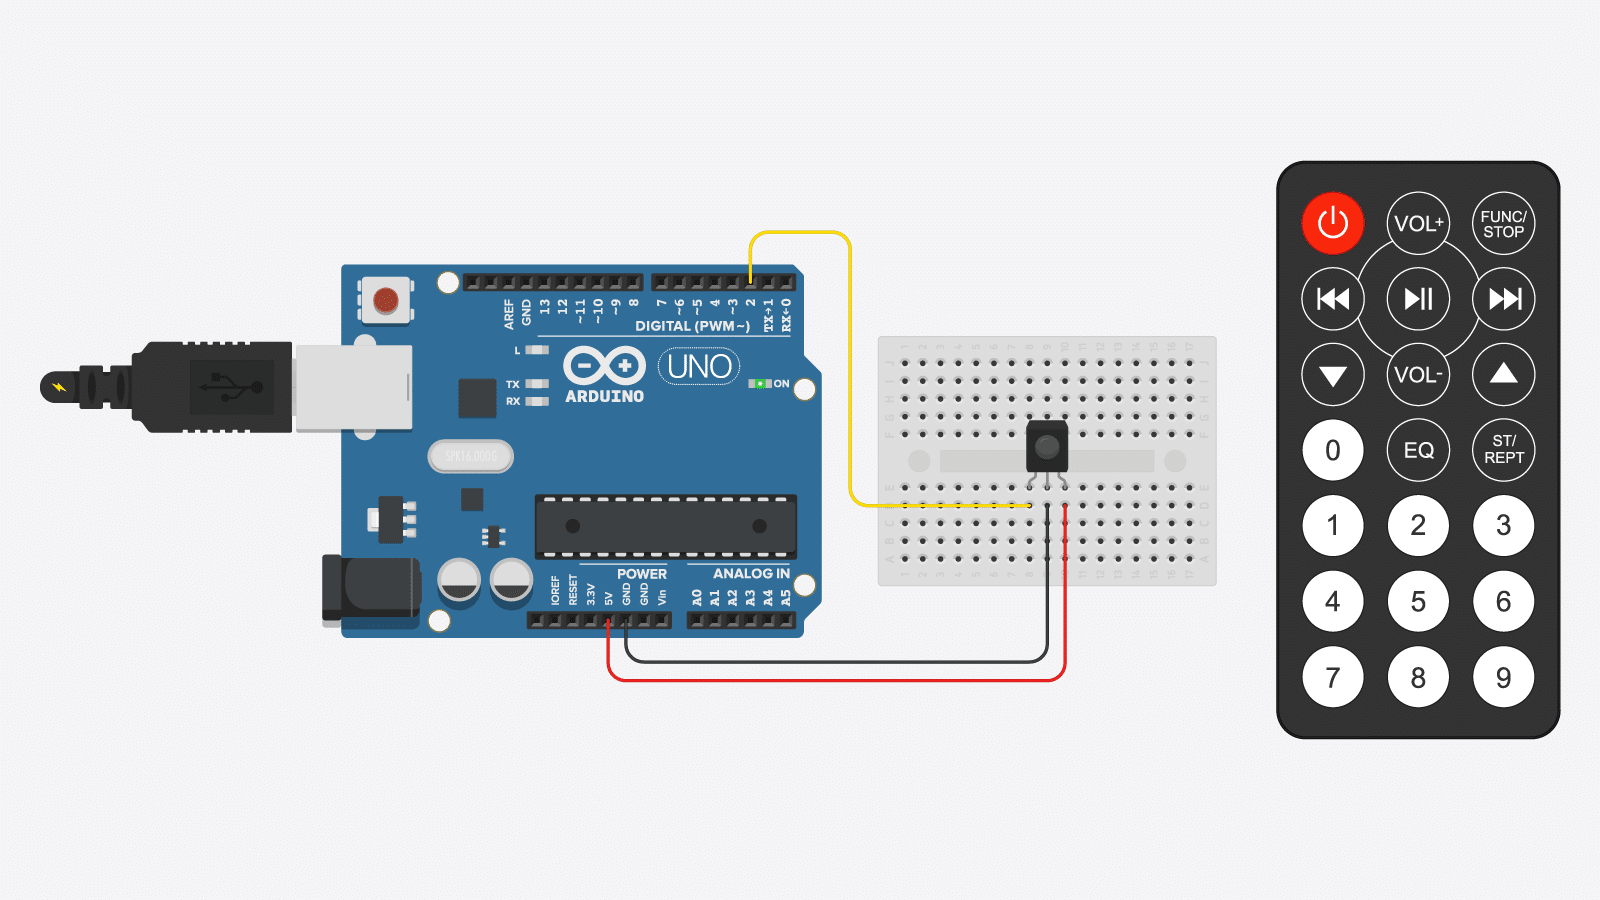 IR-remote-and-receiver-with-Arduino-wiring-diagram-schematic-circuit-tutorial-featured-image